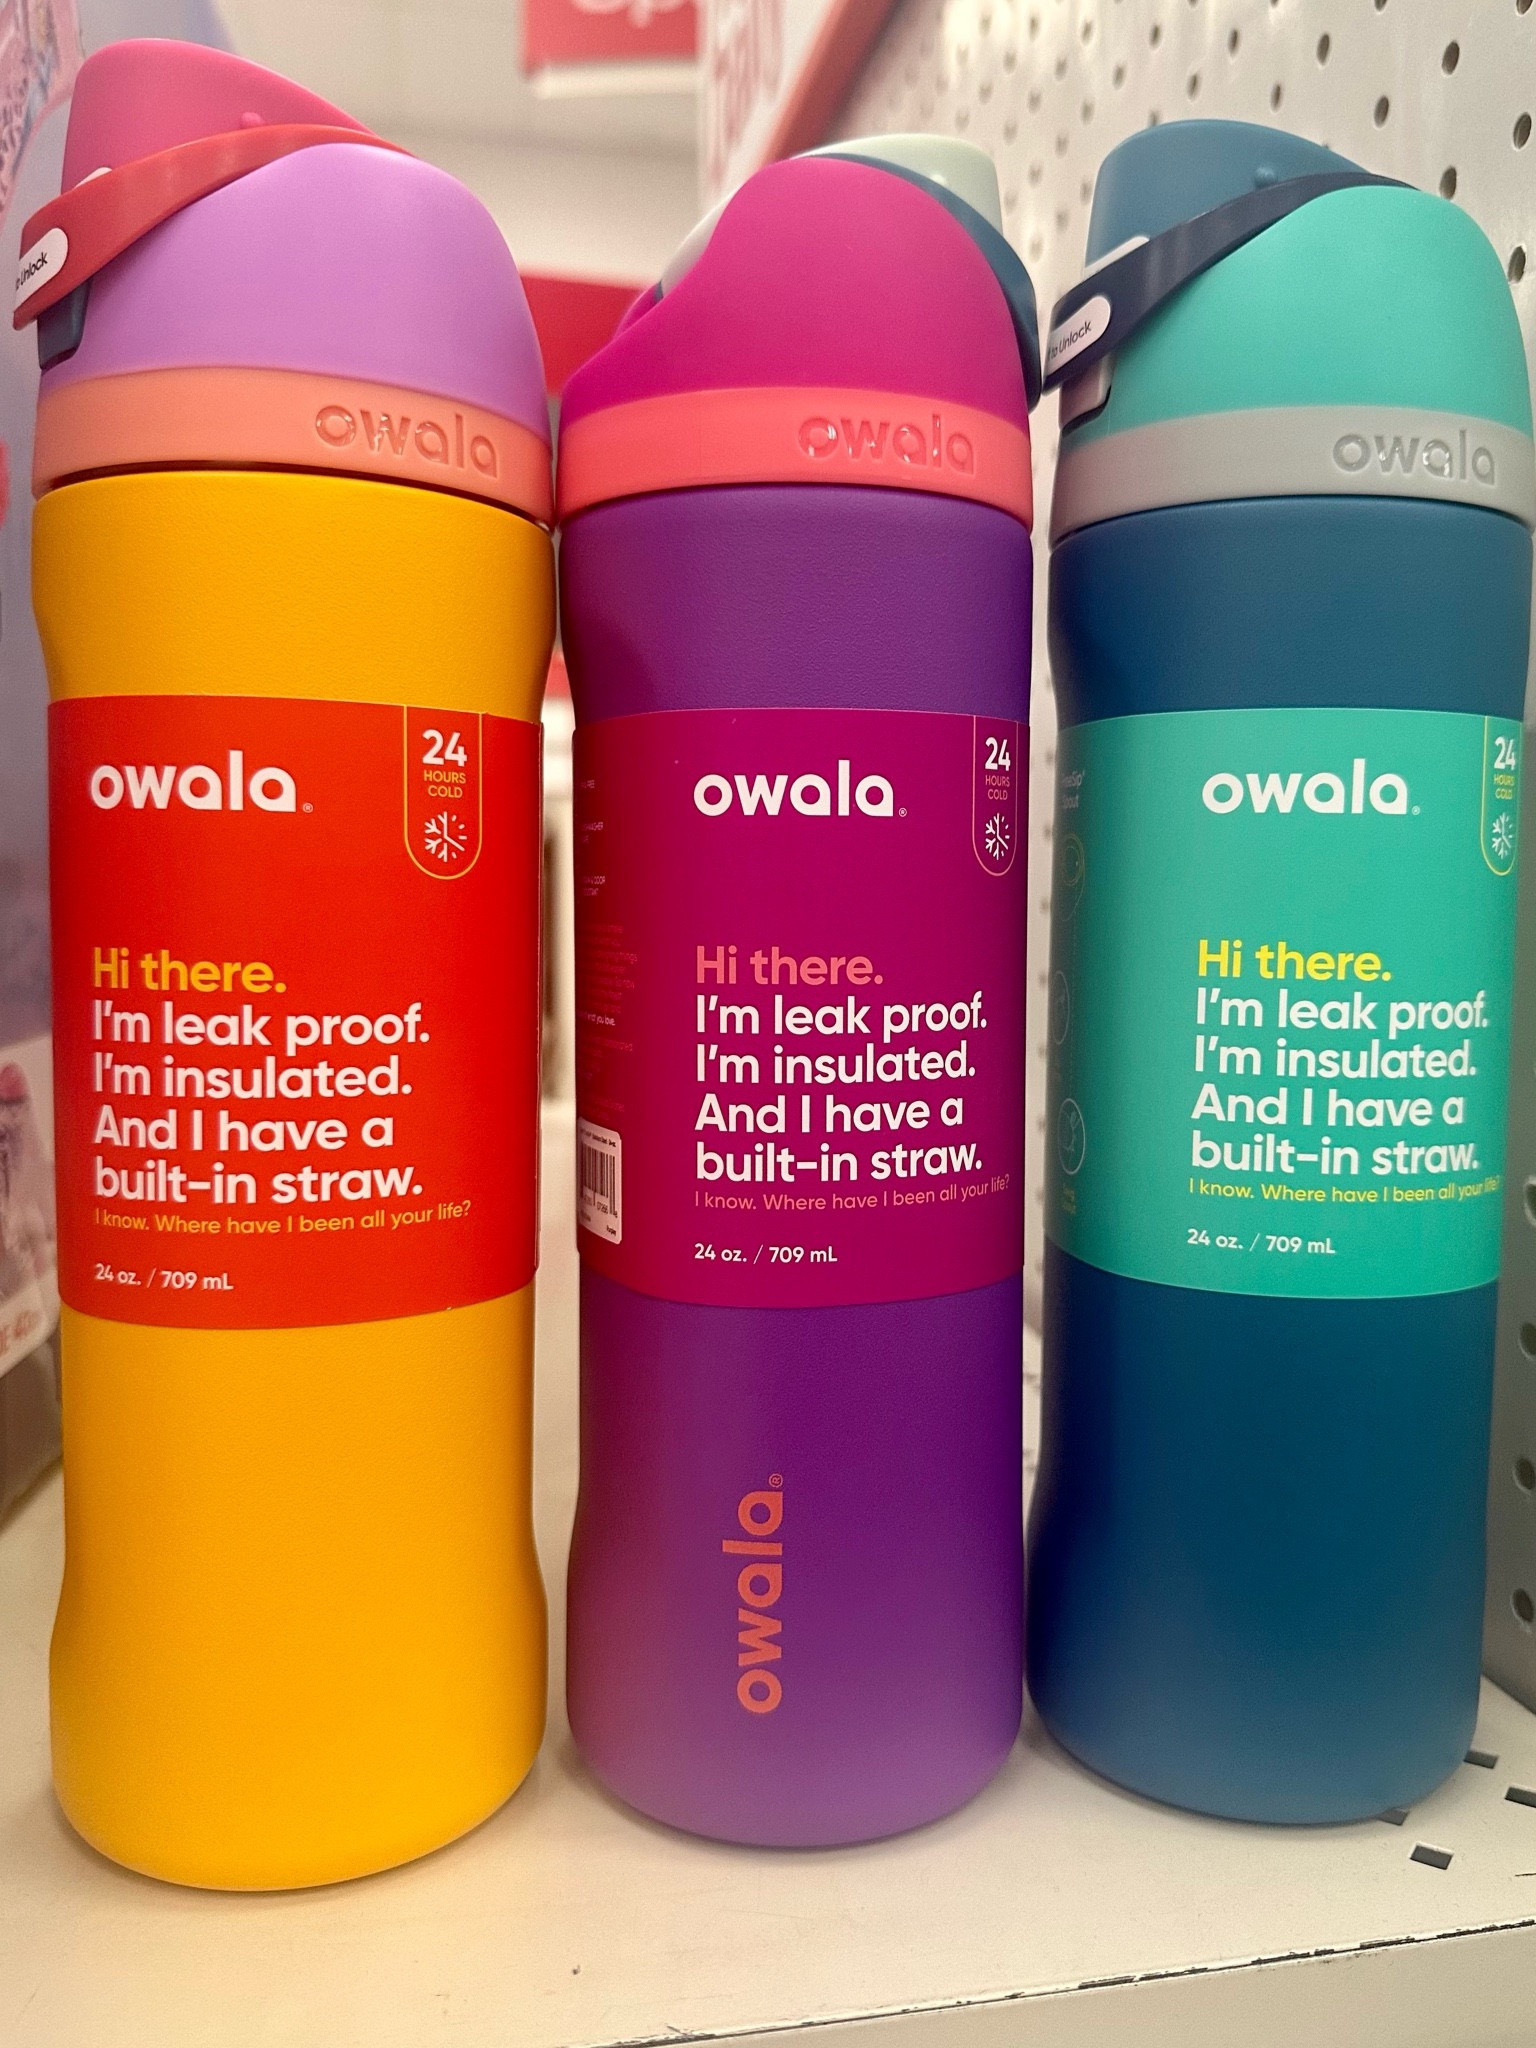 Got a new Owala! From the new Excusive Color Drop at Target! I am